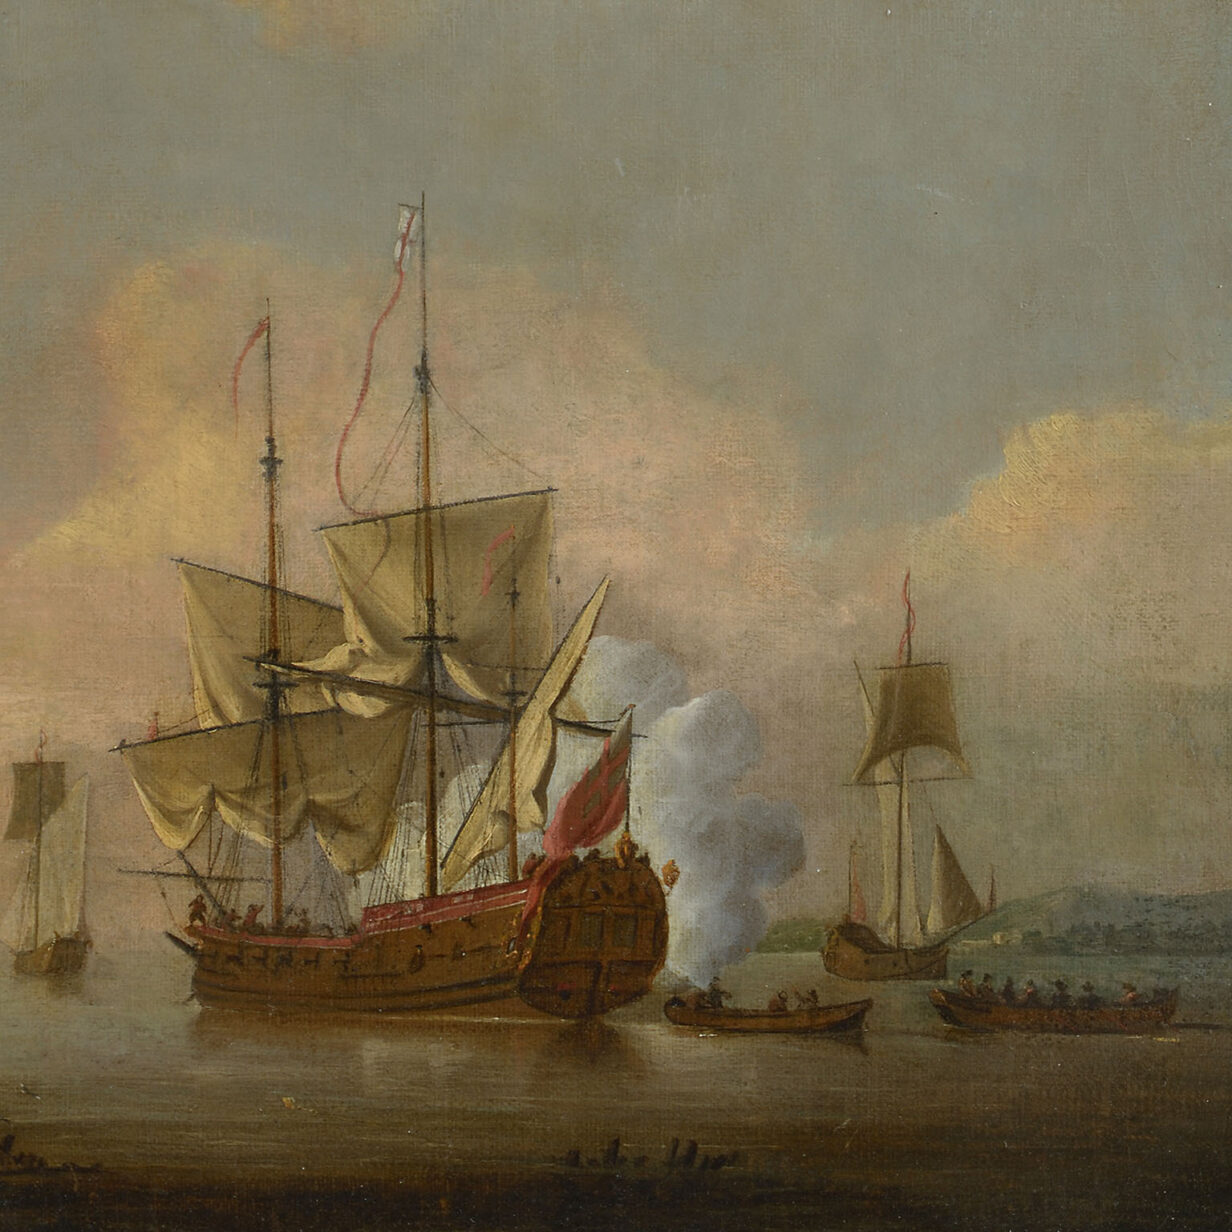 Attributed to peter monamy - an 18th century english maritime scene